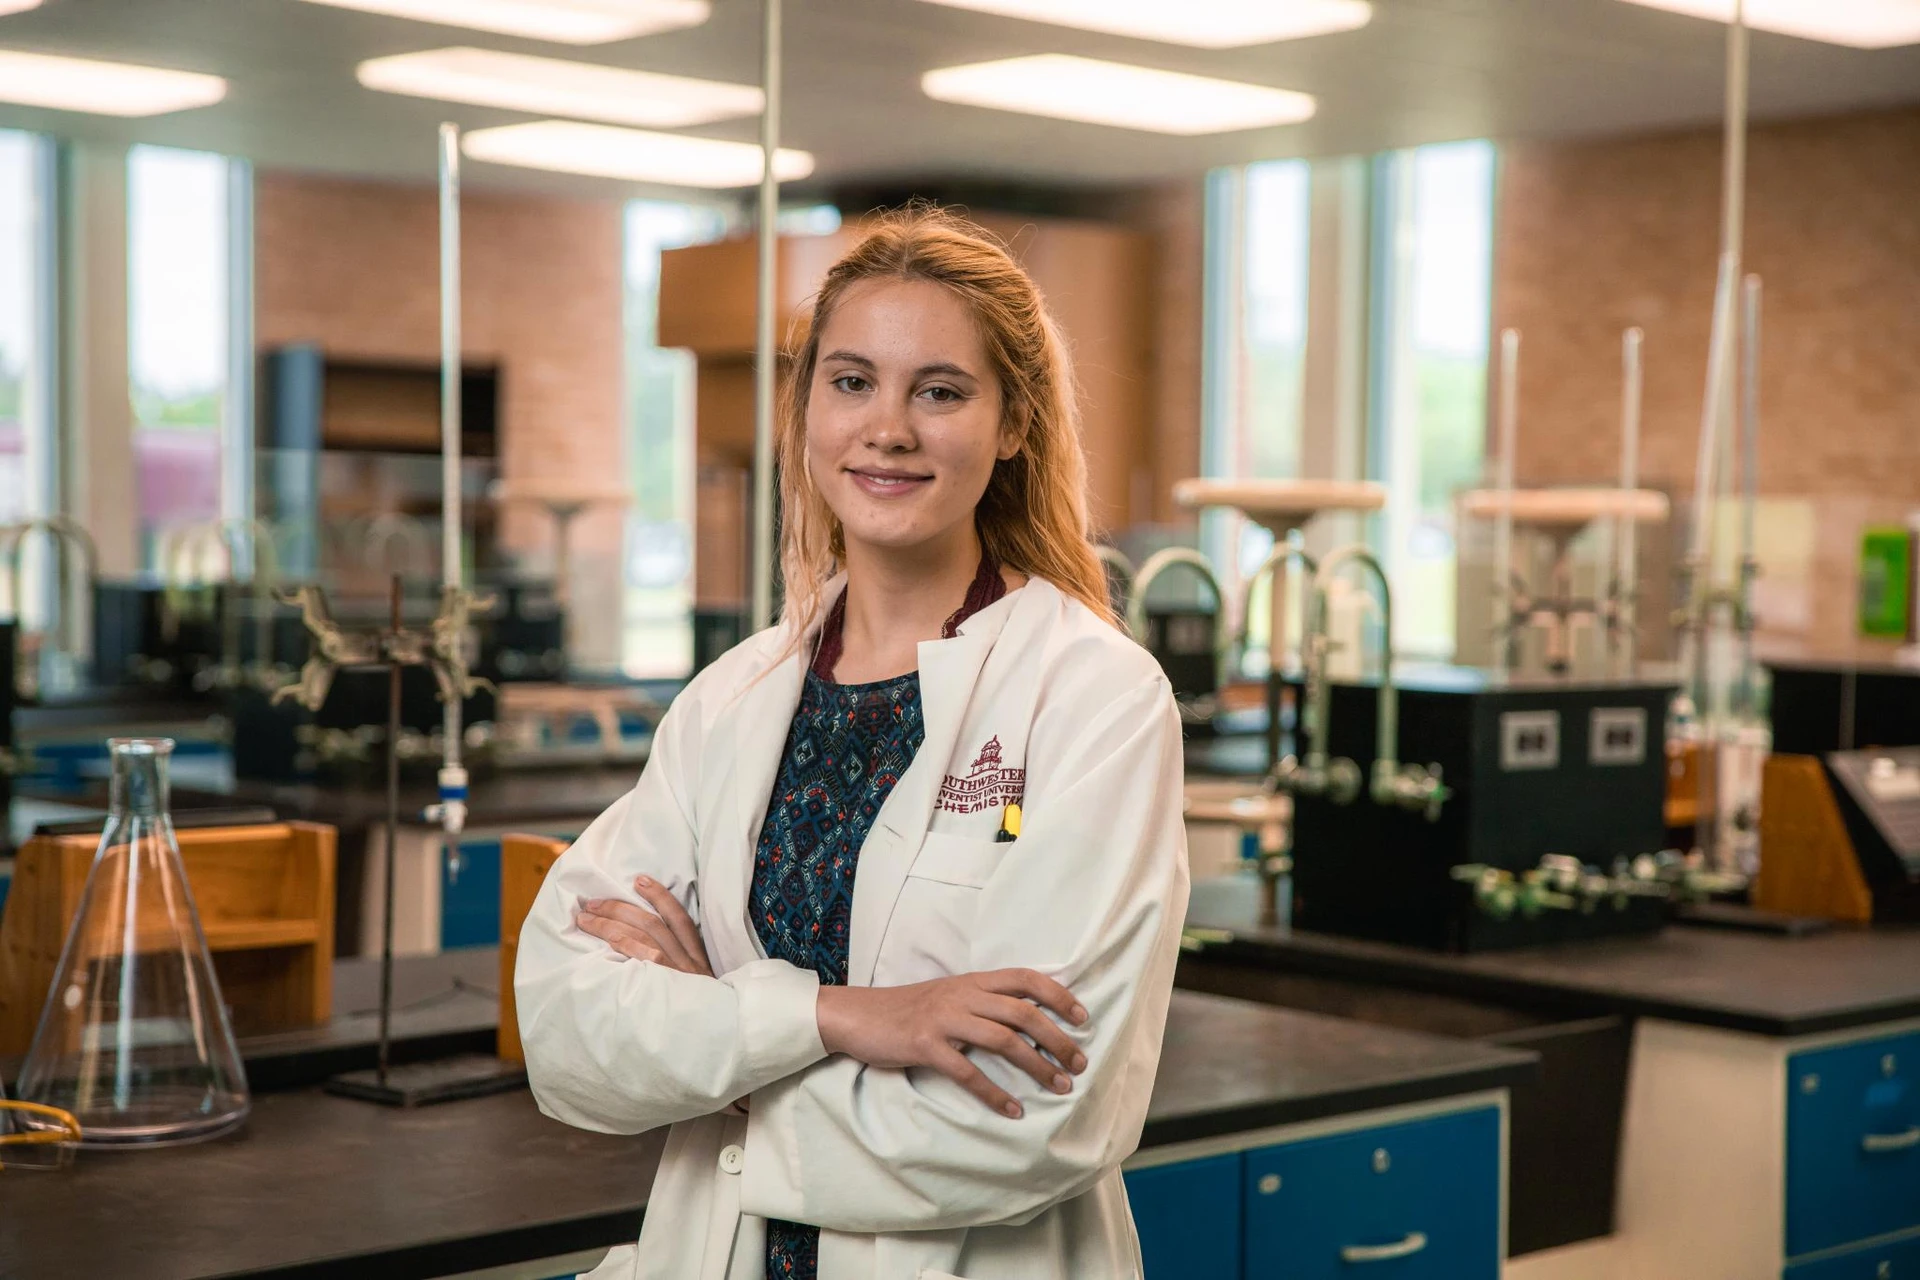 Kelsey Johnson poses in the lab with her arms crossed wearing a lab coat that reads "Southwestern Adventist University Chemistry"